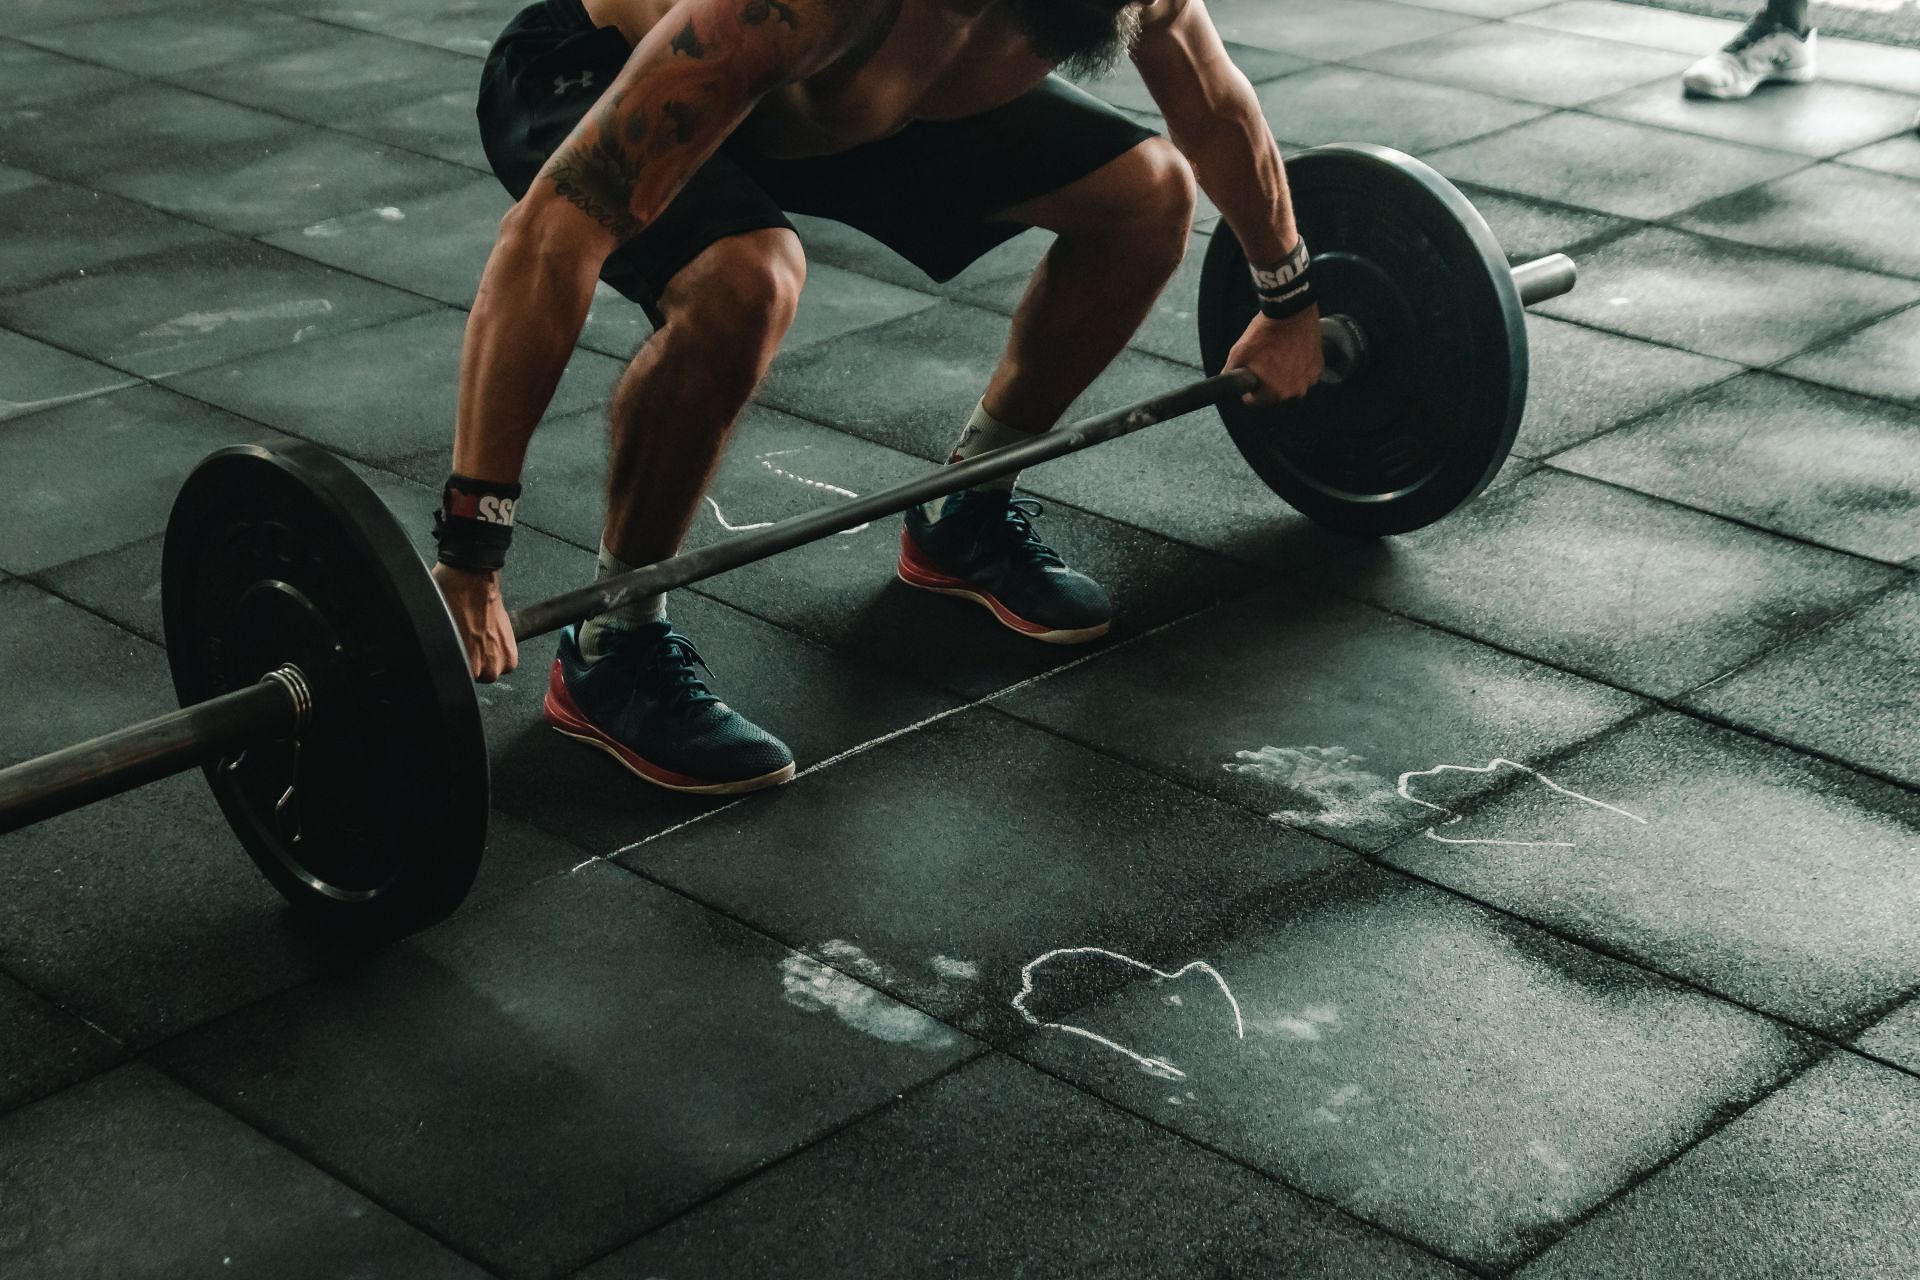 If you slam or drop weights, the Lunk Alarm will go off (Image via Pexels / Victor Freitas)